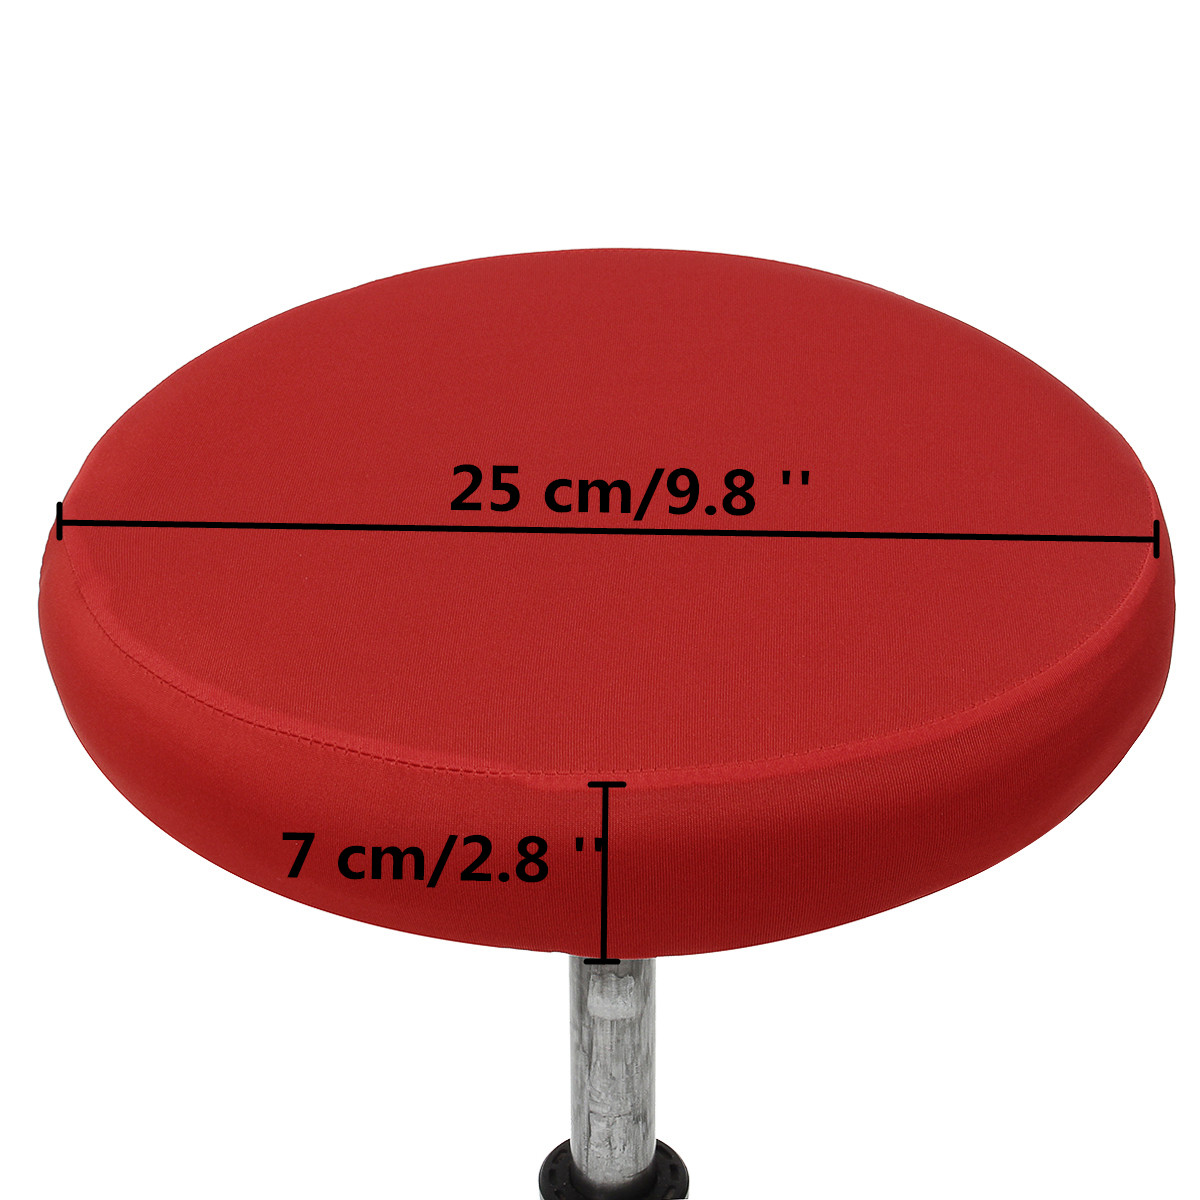 Round-Stool-Covers-Elastic-Fiber-6-Colors-Round-Household-Chair-Sleeve-Protector-1438986